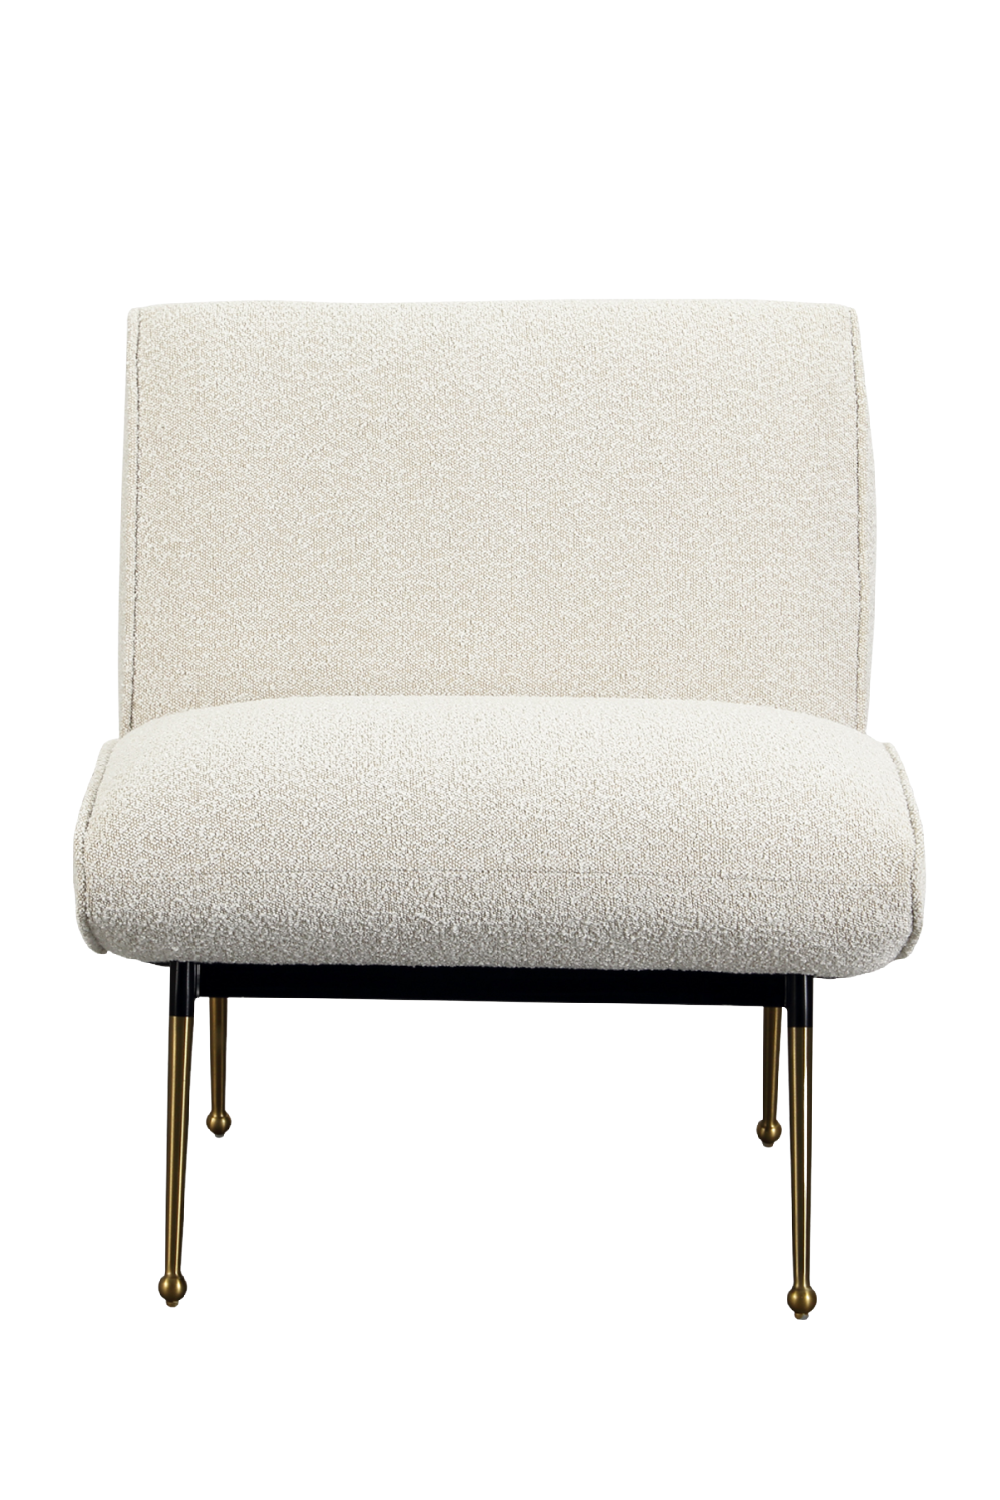 Upholstered Contemporary Occasional Chair | Liang & Eimil Oda | Oroa.com